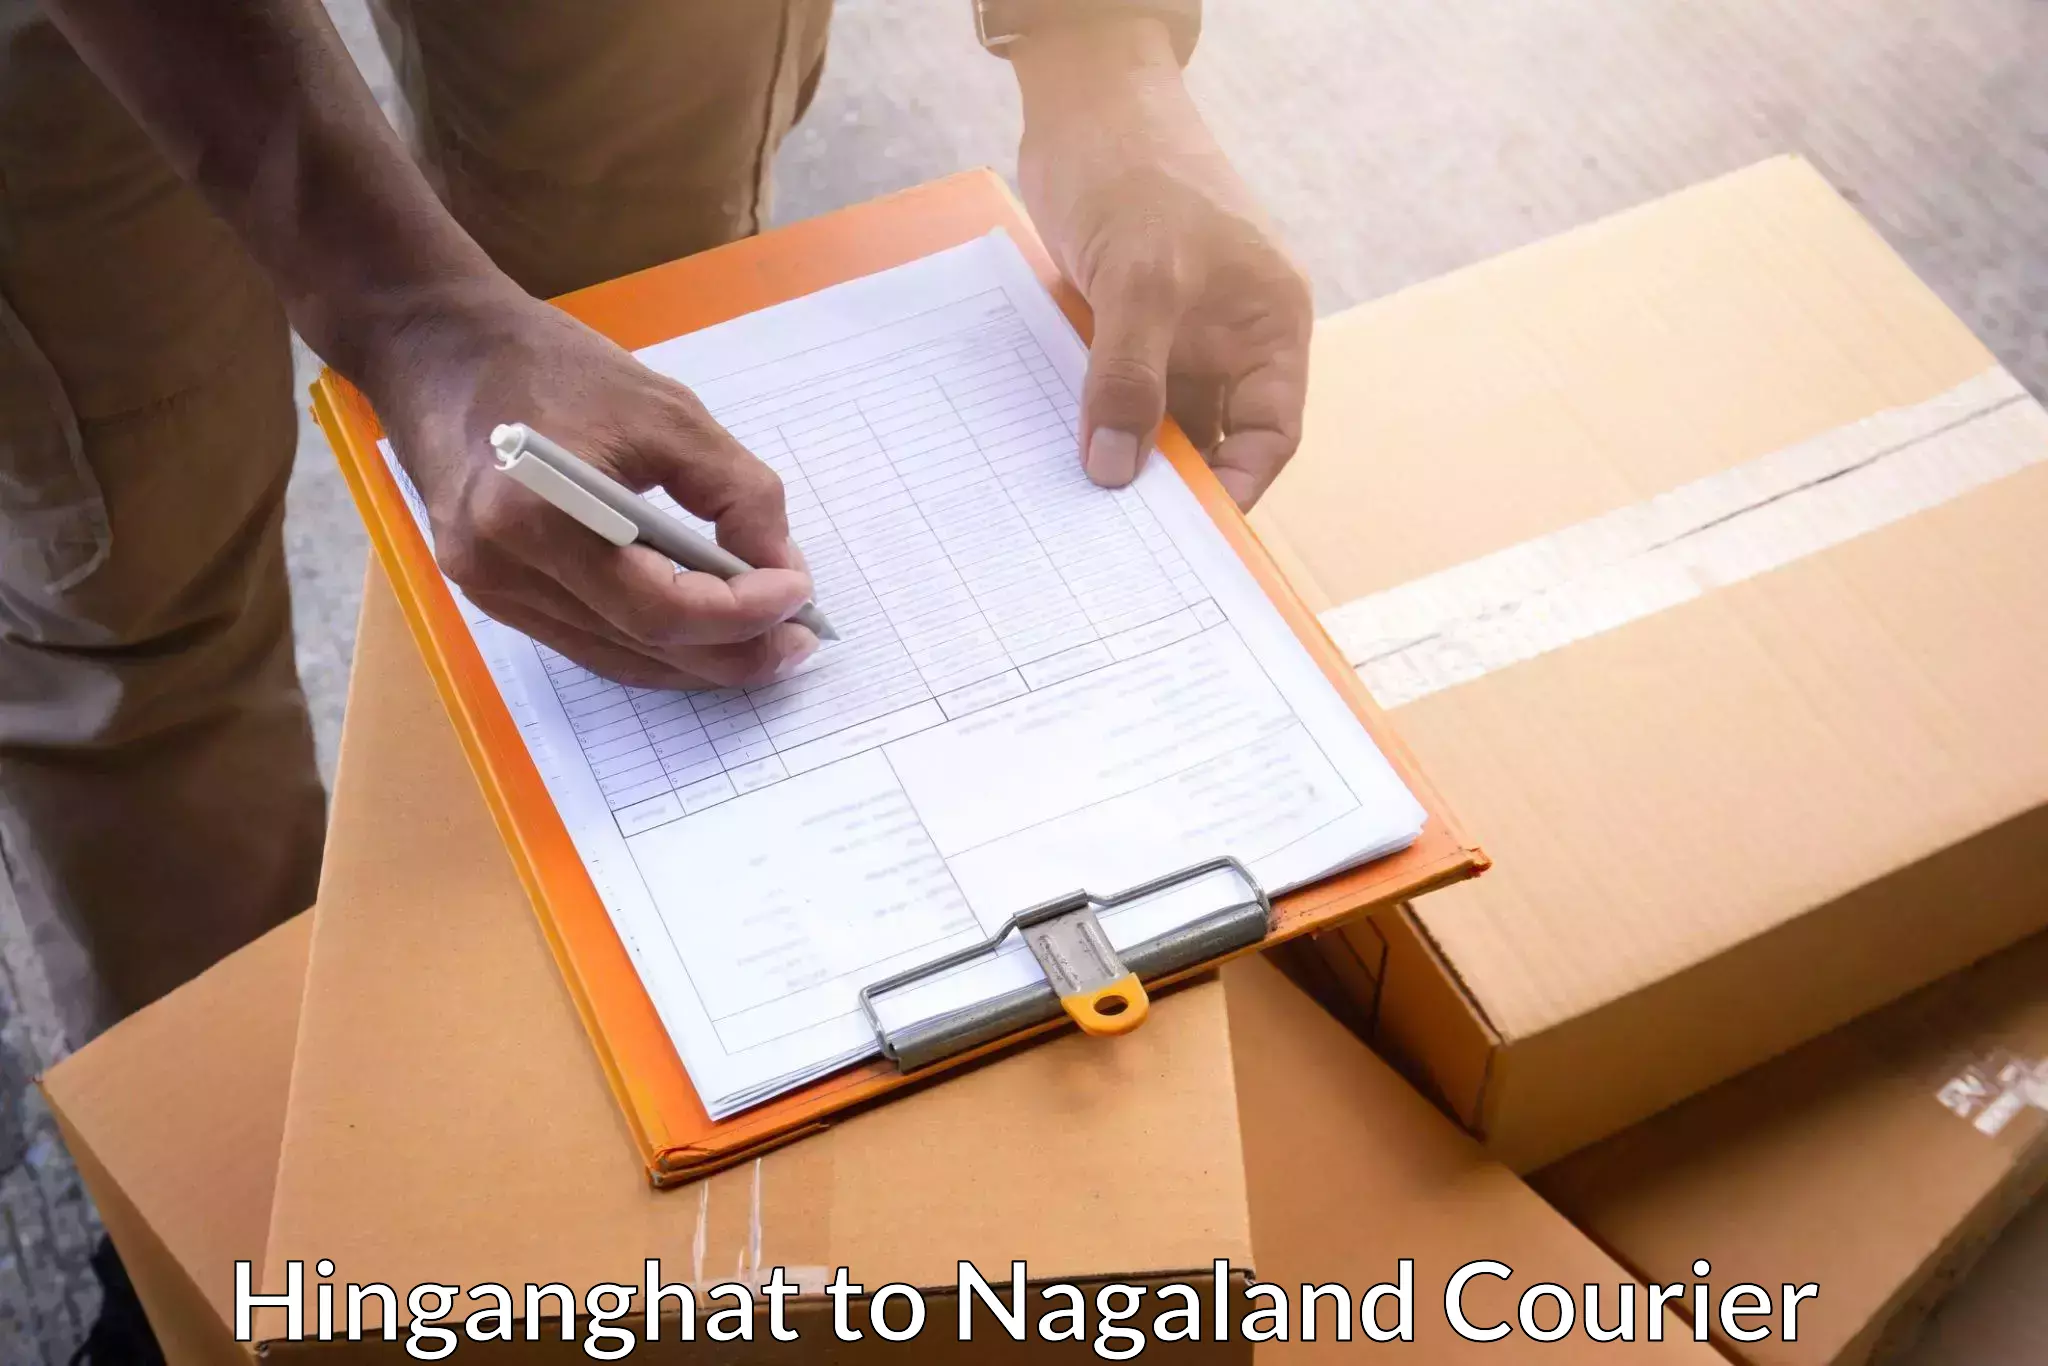 Cargo delivery service Hinganghat to Nagaland